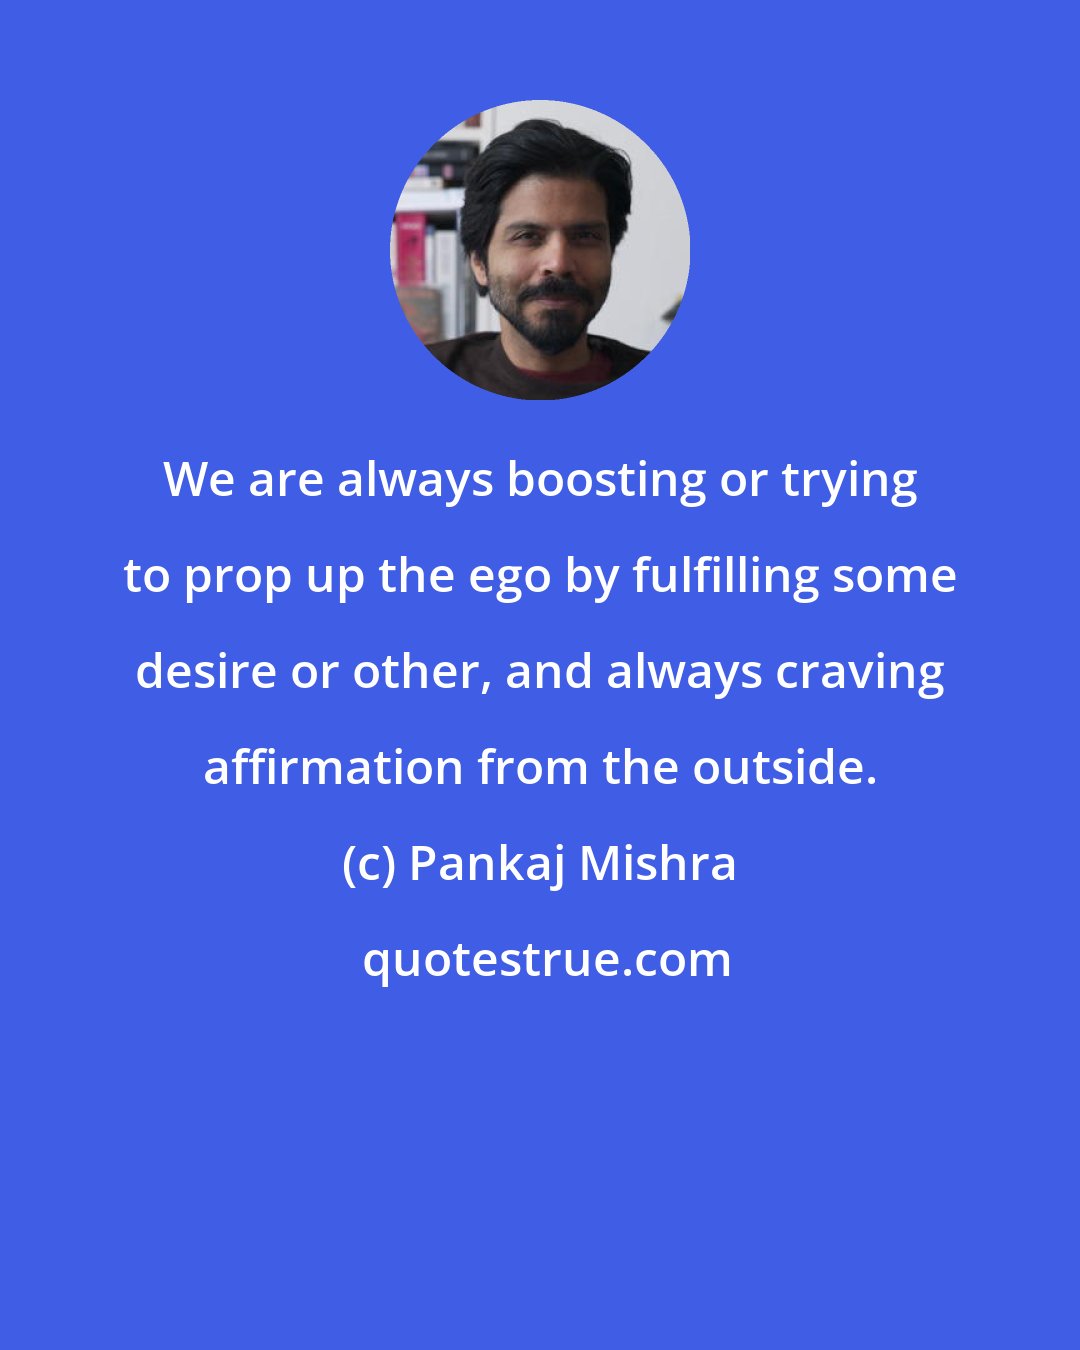 Pankaj Mishra: We are always boosting or trying to prop up the ego by fulfilling some desire or other, and always craving affirmation from the outside.